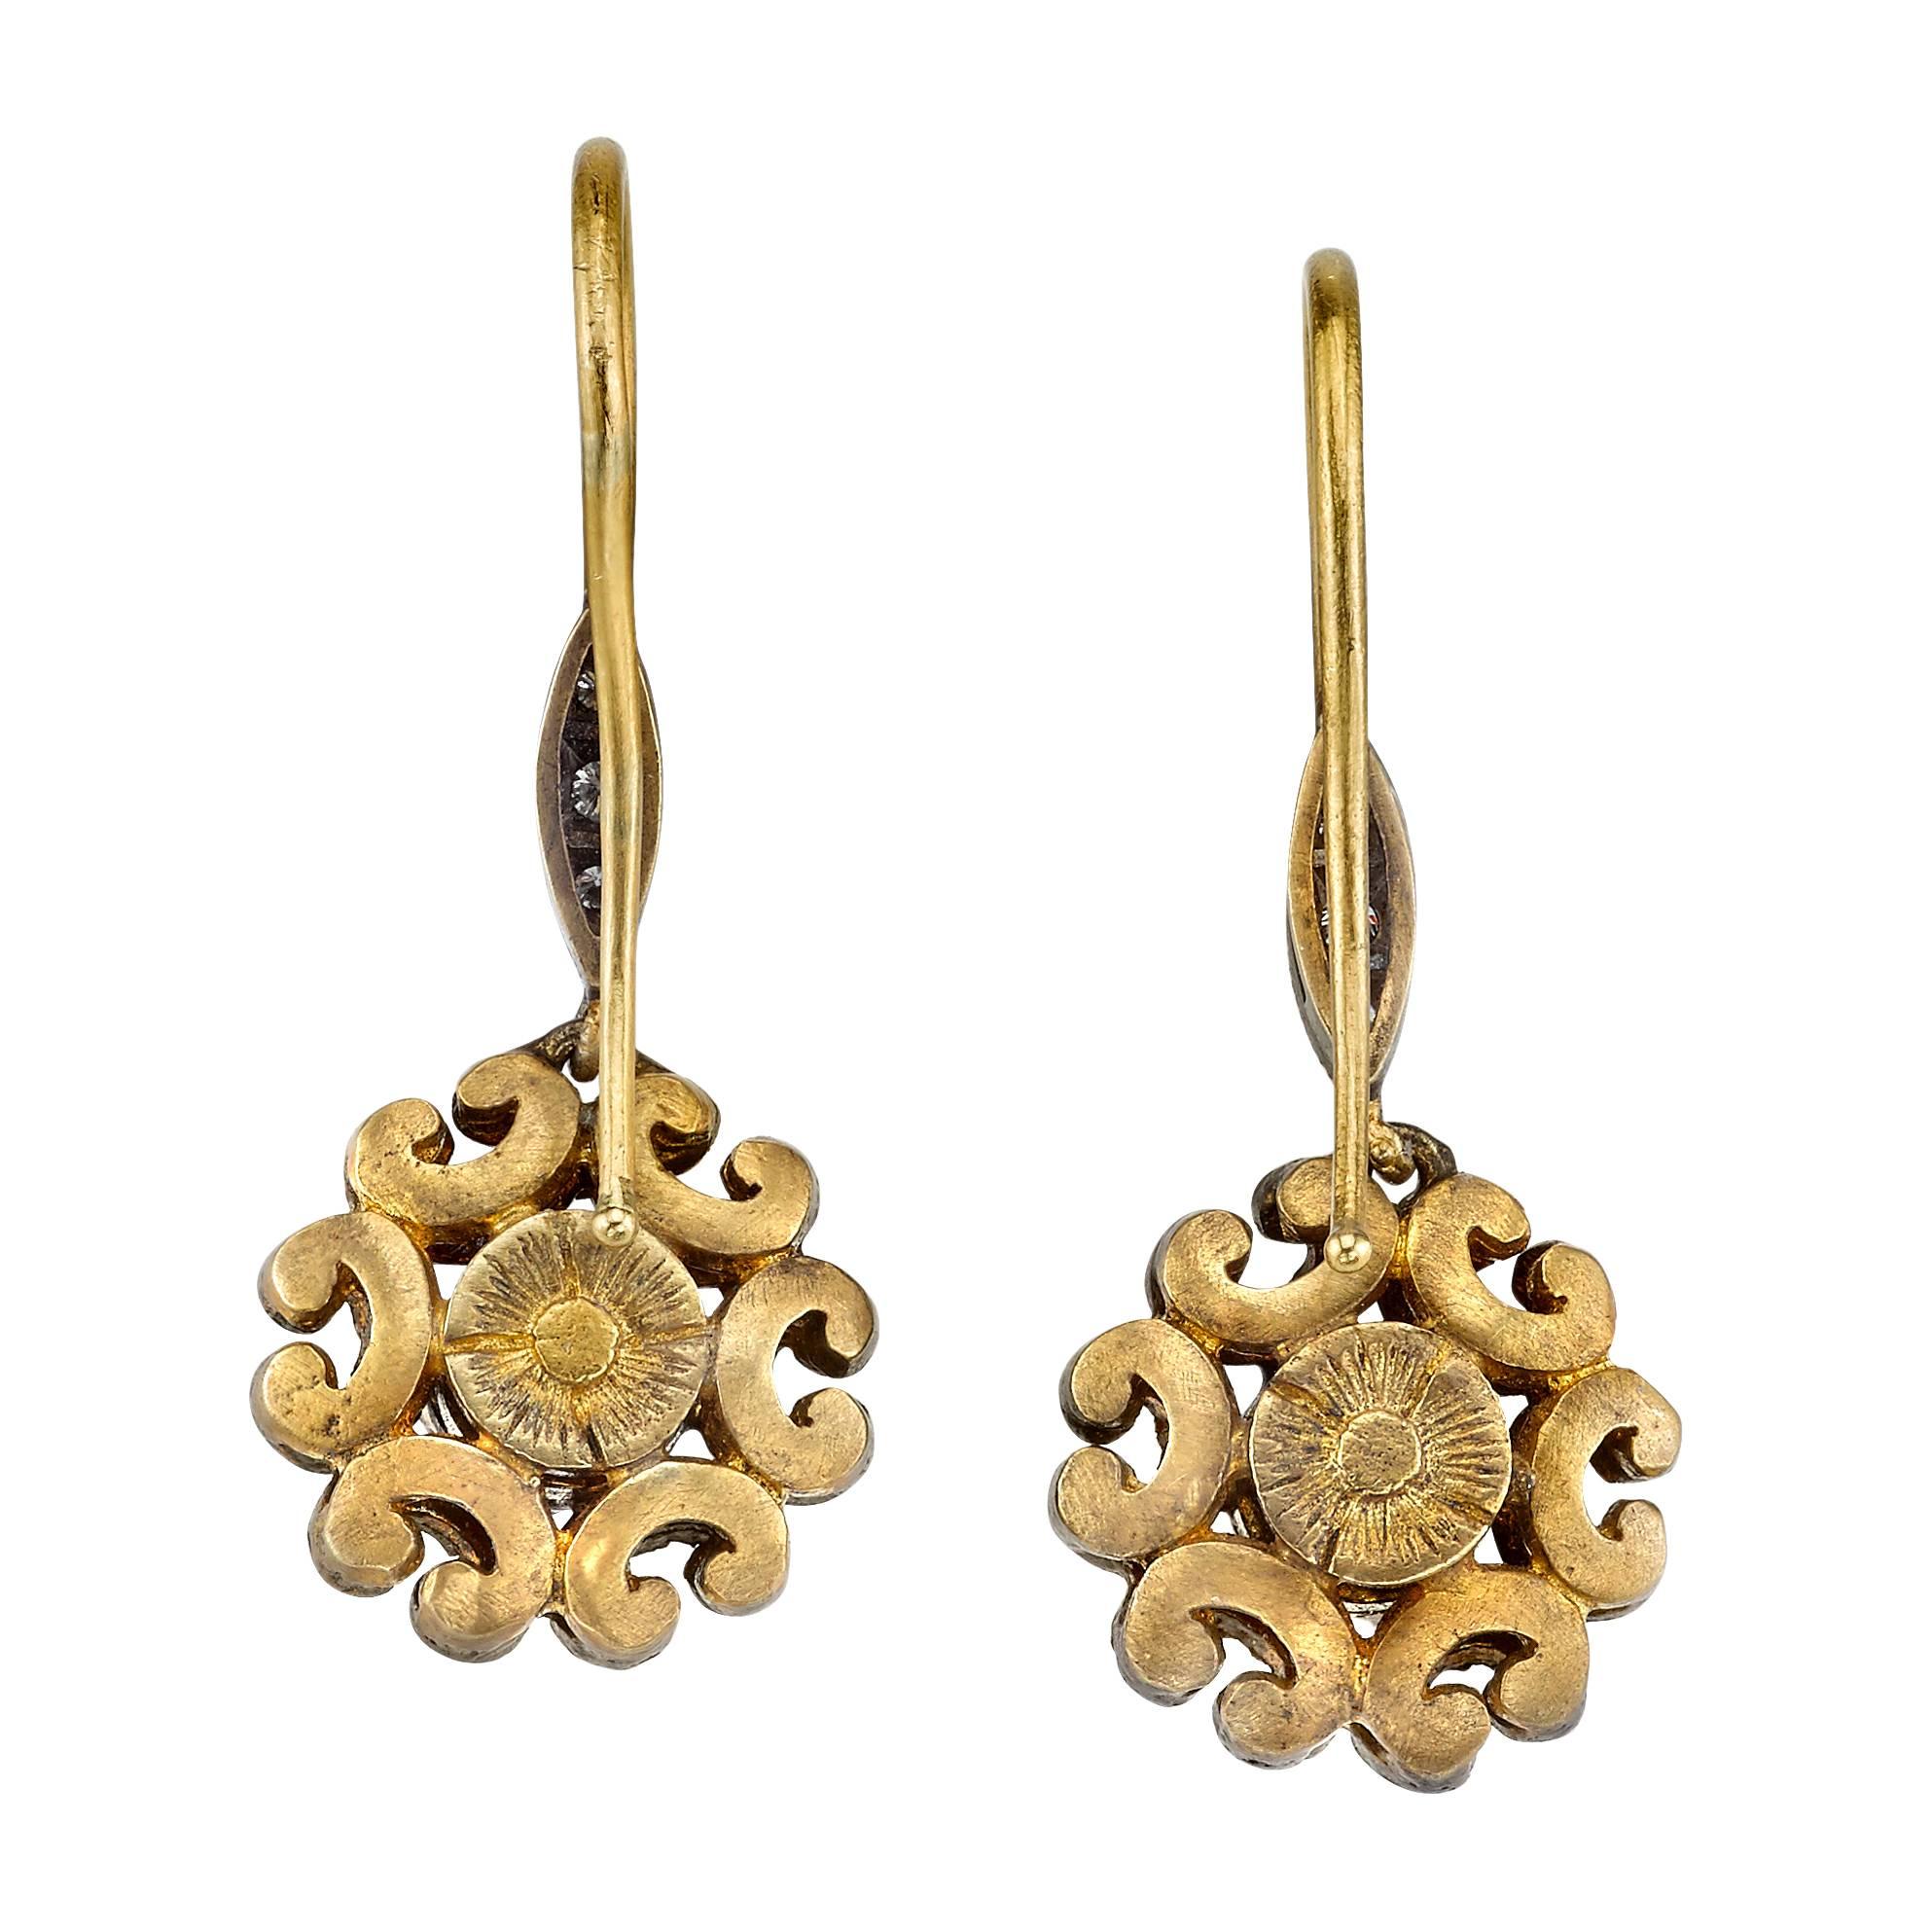 18 Karat Yellow Gold Dangle Earrings with 0.50 CT Rose Cut Diamonds and 0.44 CT Round Brilliant Cut Diamonds, accented with an Antique Silver Patina Finish. These earrings hang at about __ inch in length and are 0.5 inches wide. 

Inspired by the